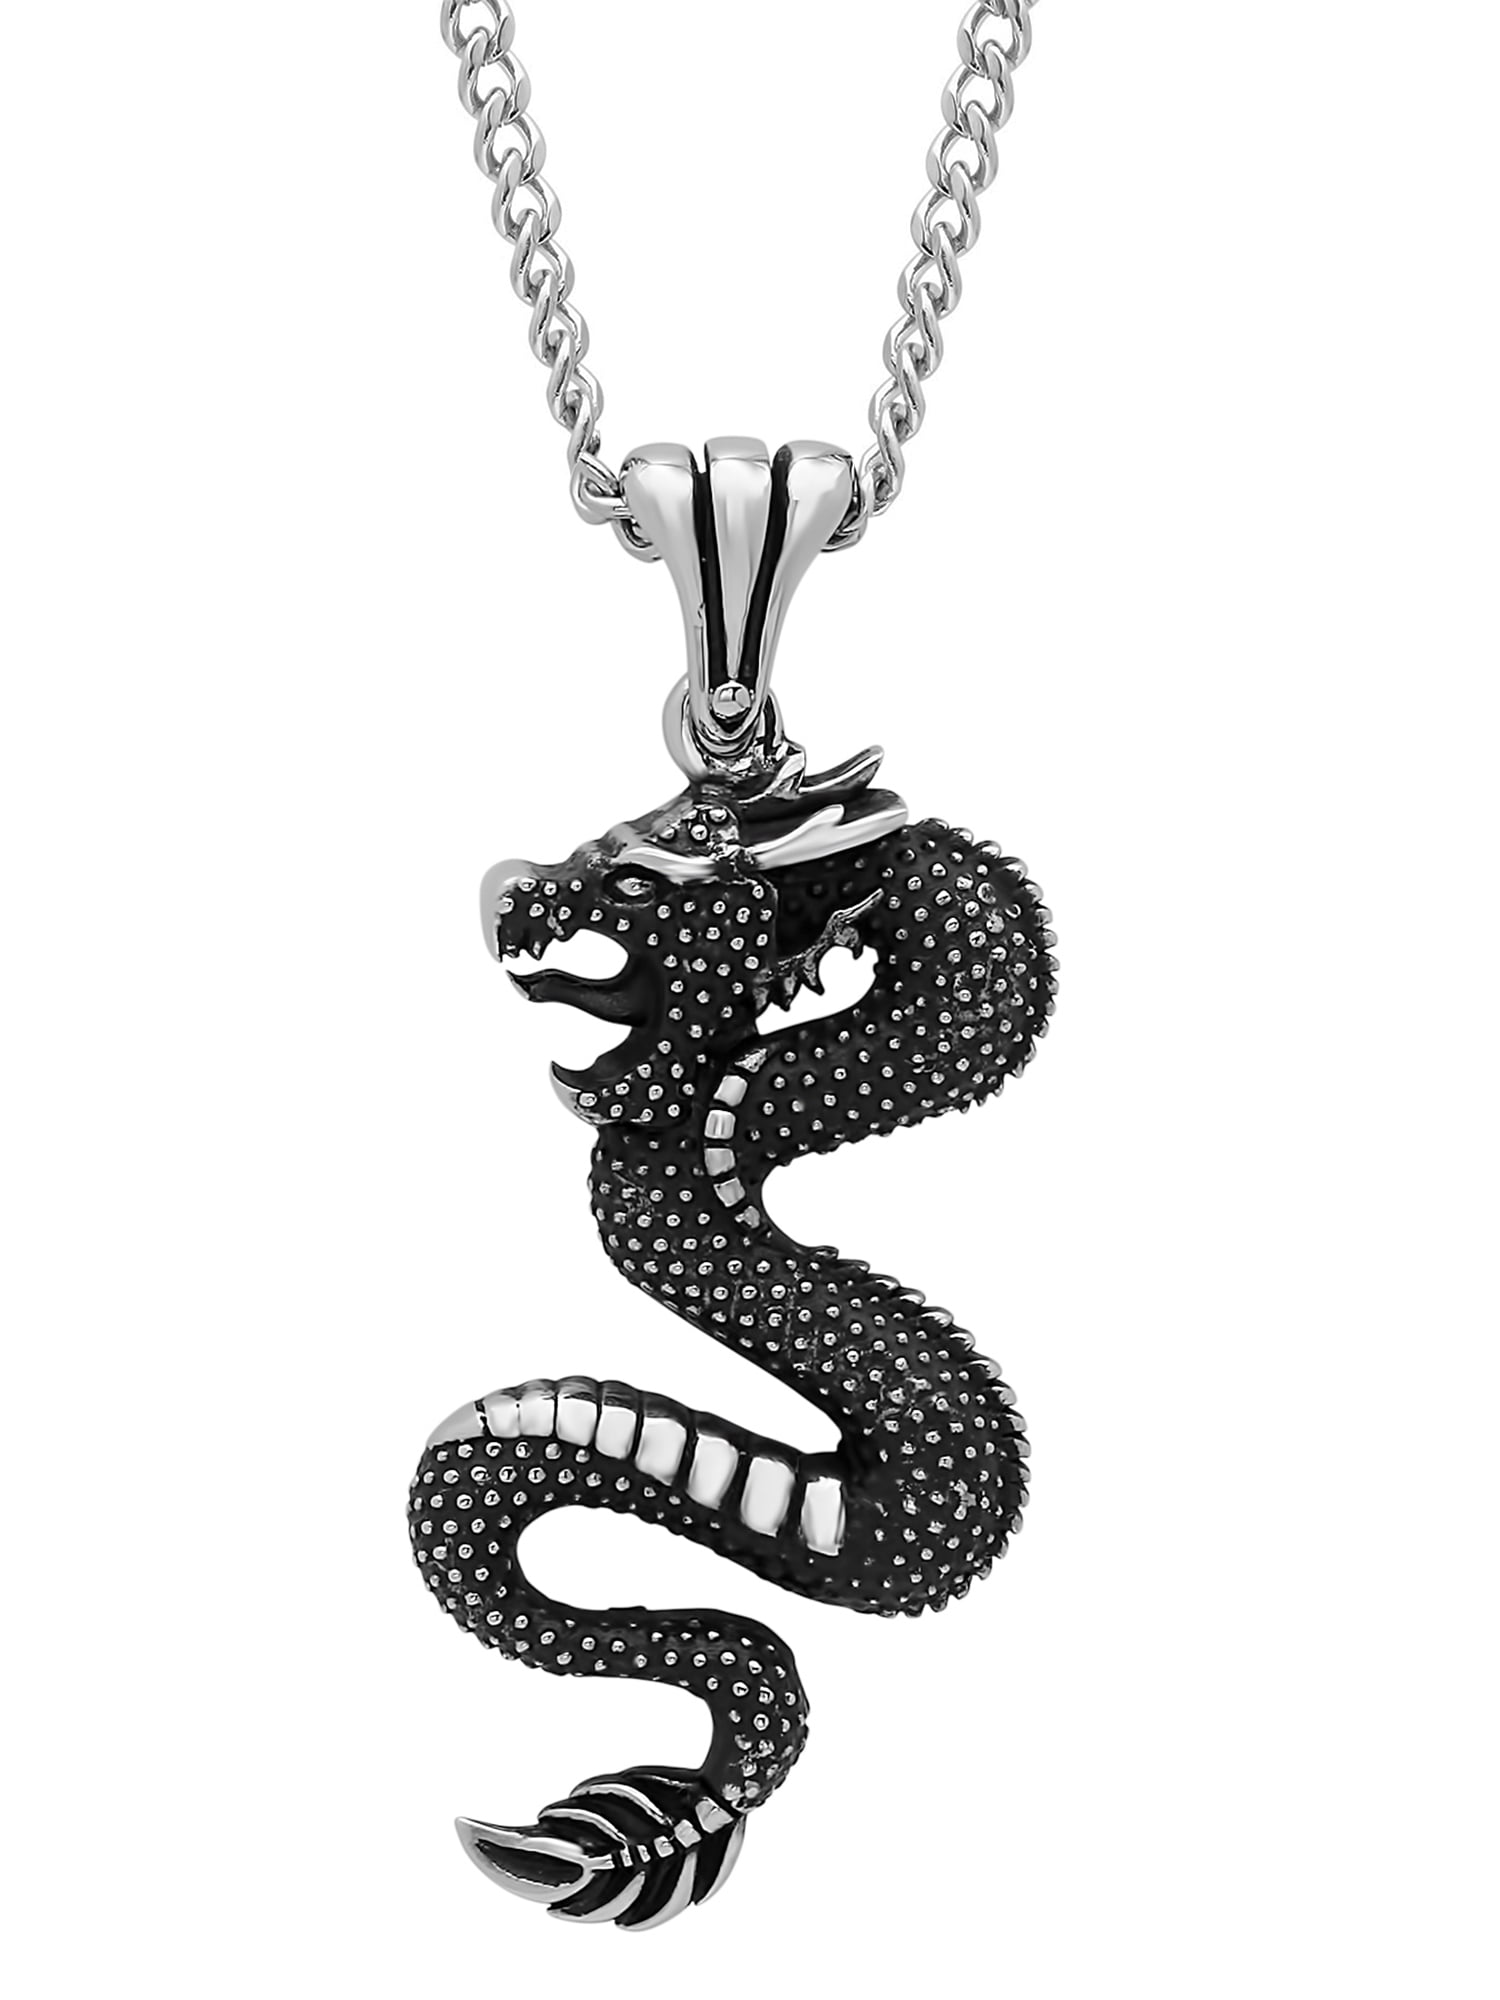 Men's Black Stainless Steel Wyrm Dragon Textured Pendant Necklace